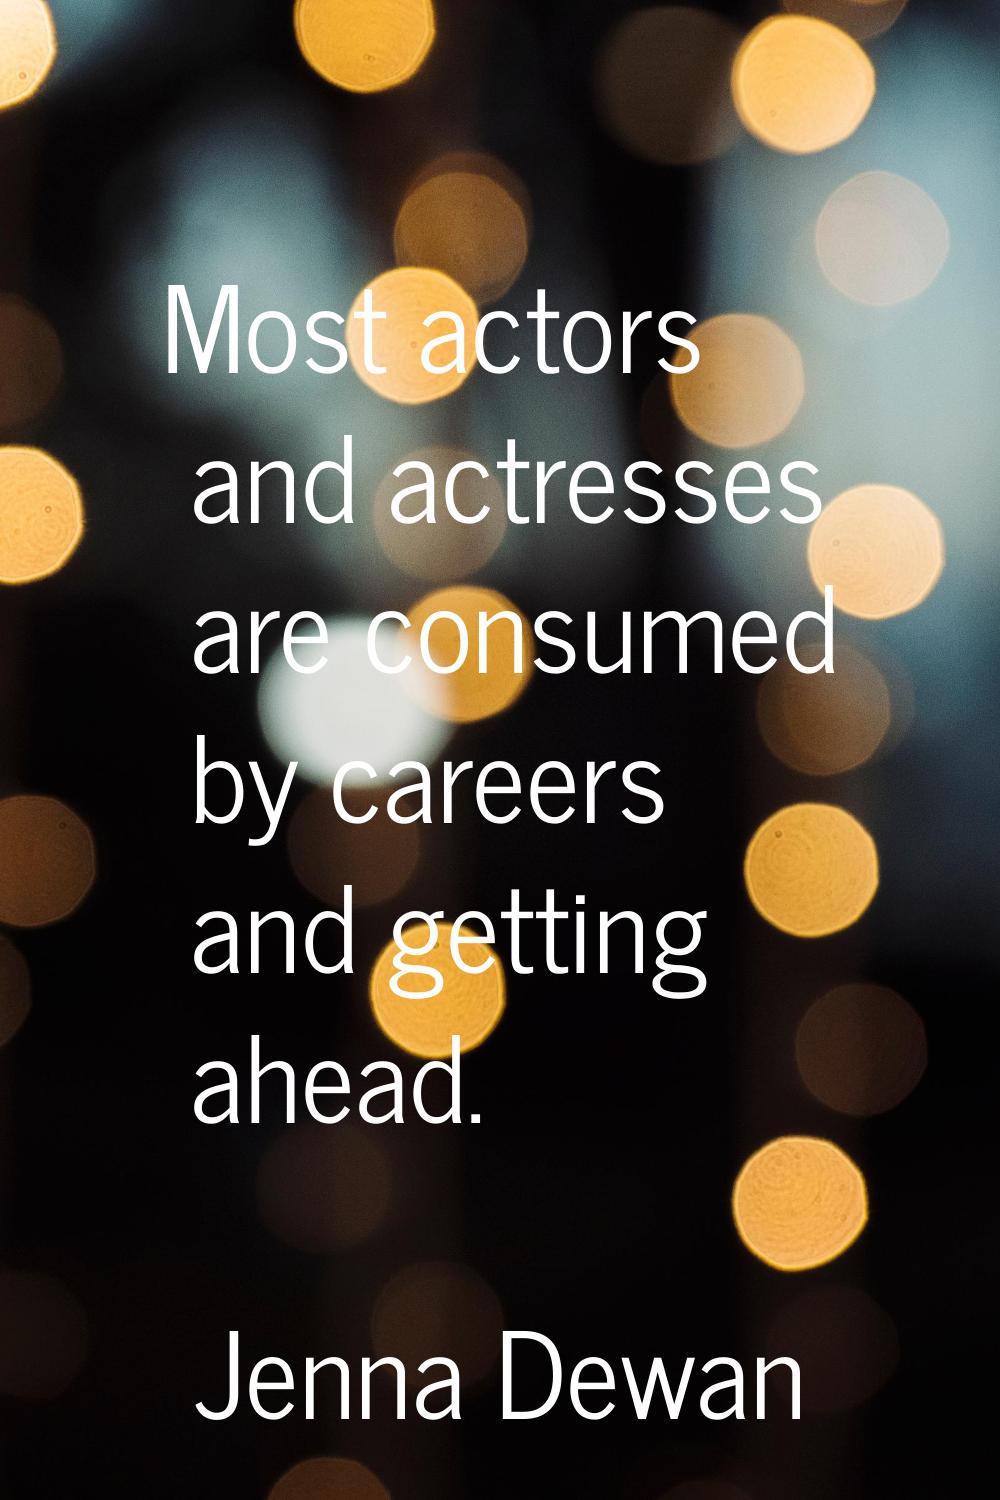 Most actors and actresses are consumed by careers and getting ahead.